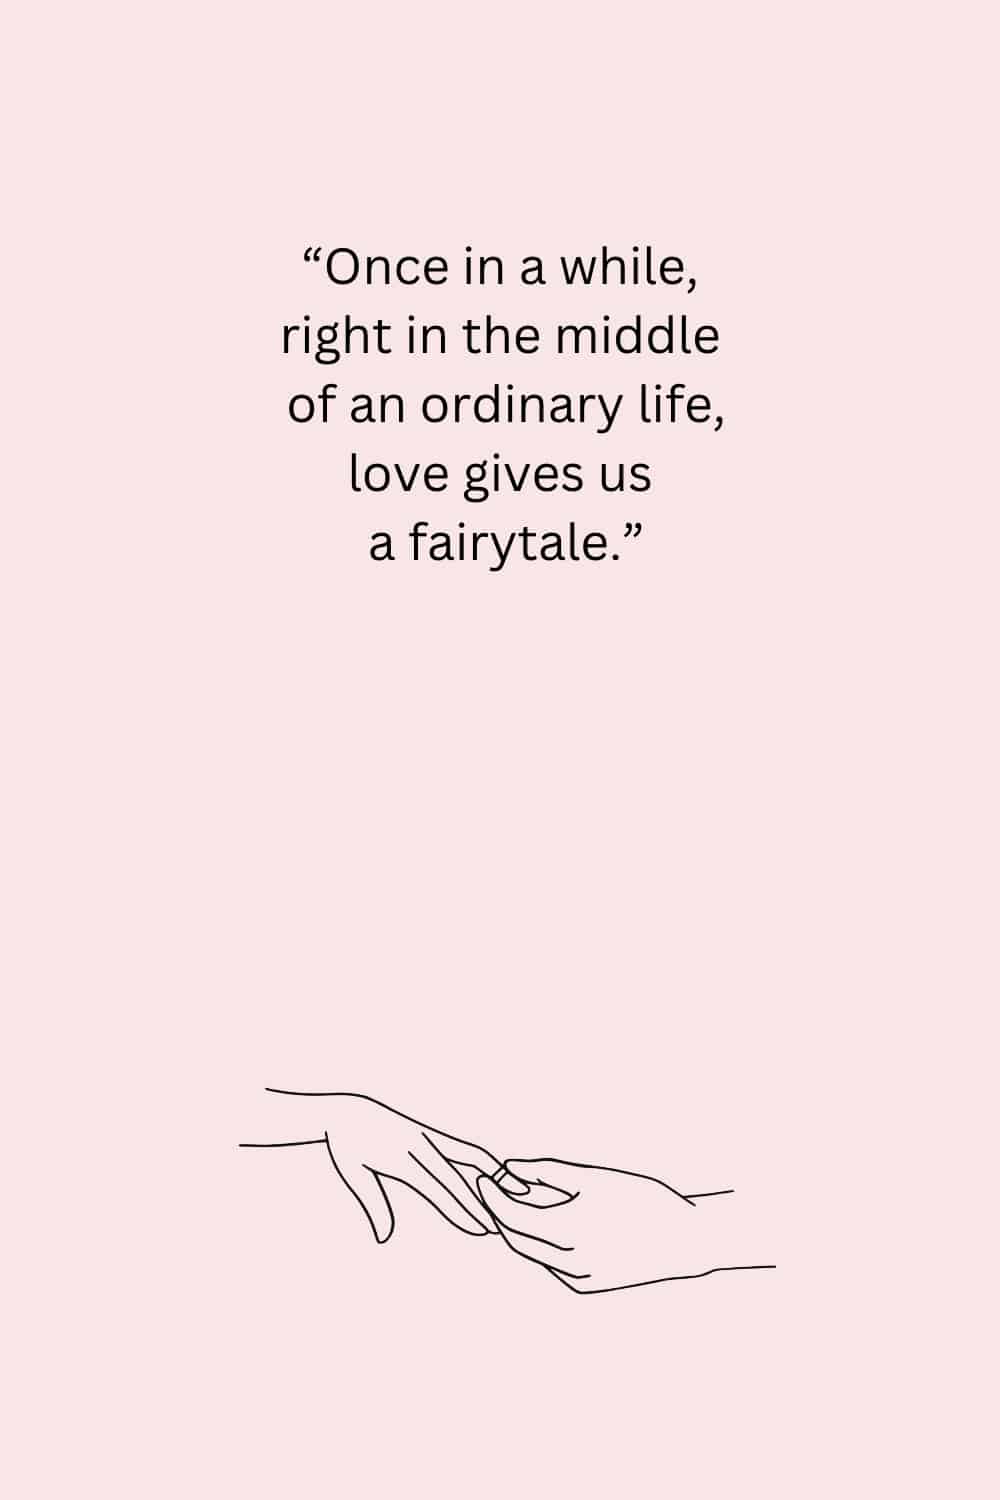 “Once in a while,right in the middle of an ordinary life,love gives us a fairytale.” - Unbekannt